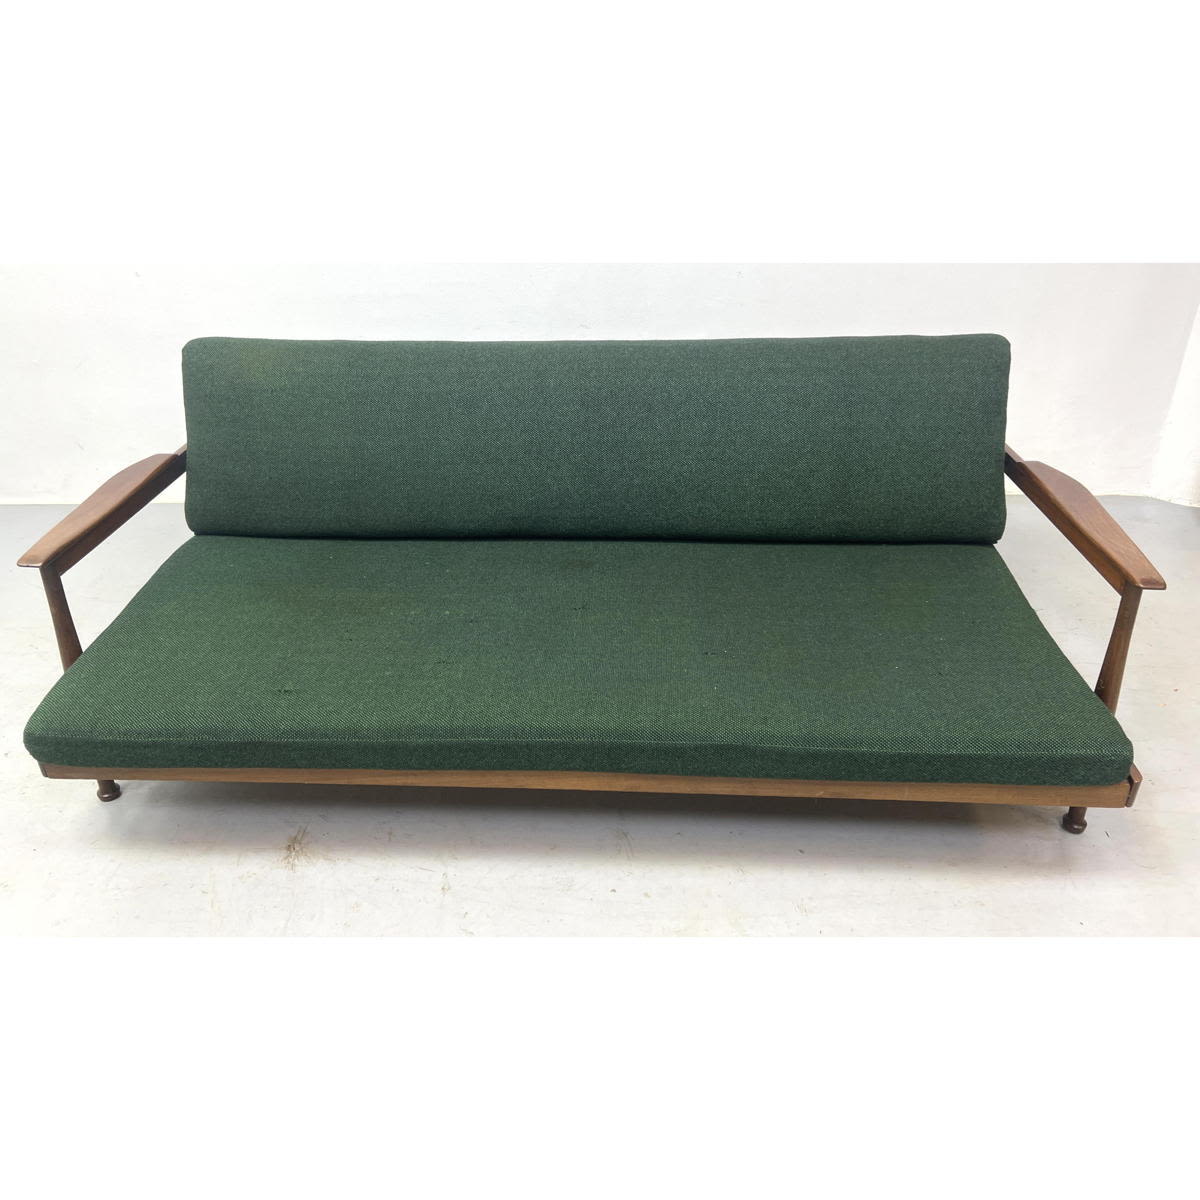 Guy Rodgers Manhattan Day Bed Sofa 3ad52e